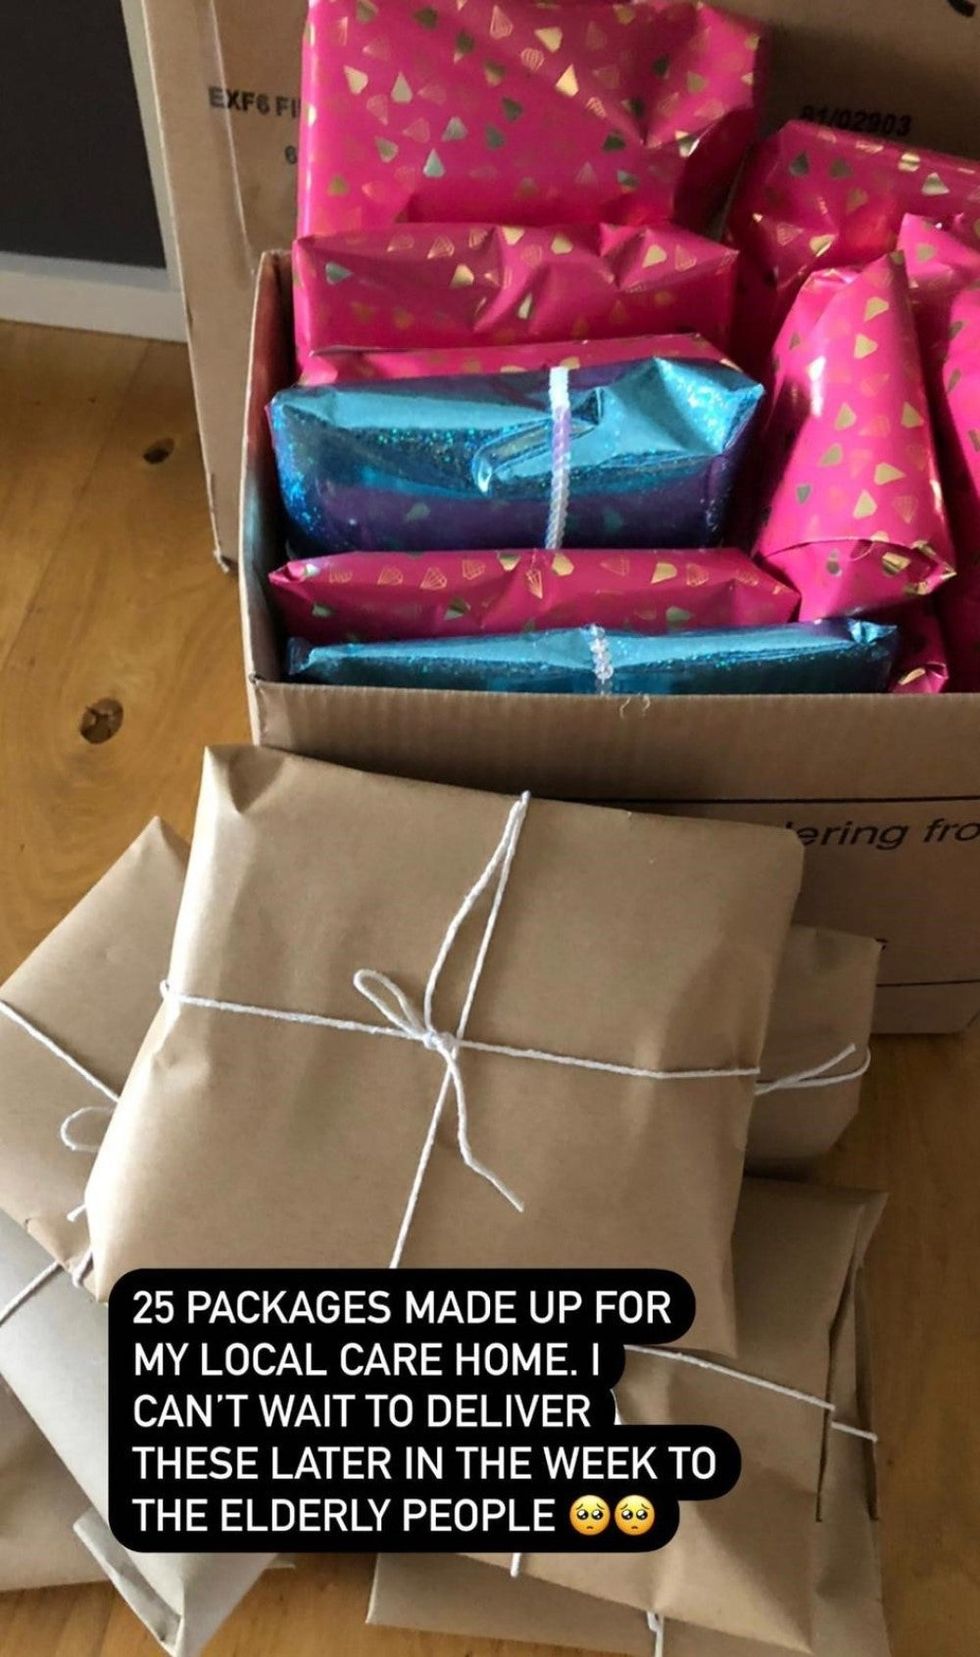 Ms Rose once made and posted 20 packages in one day (Alice Rose)